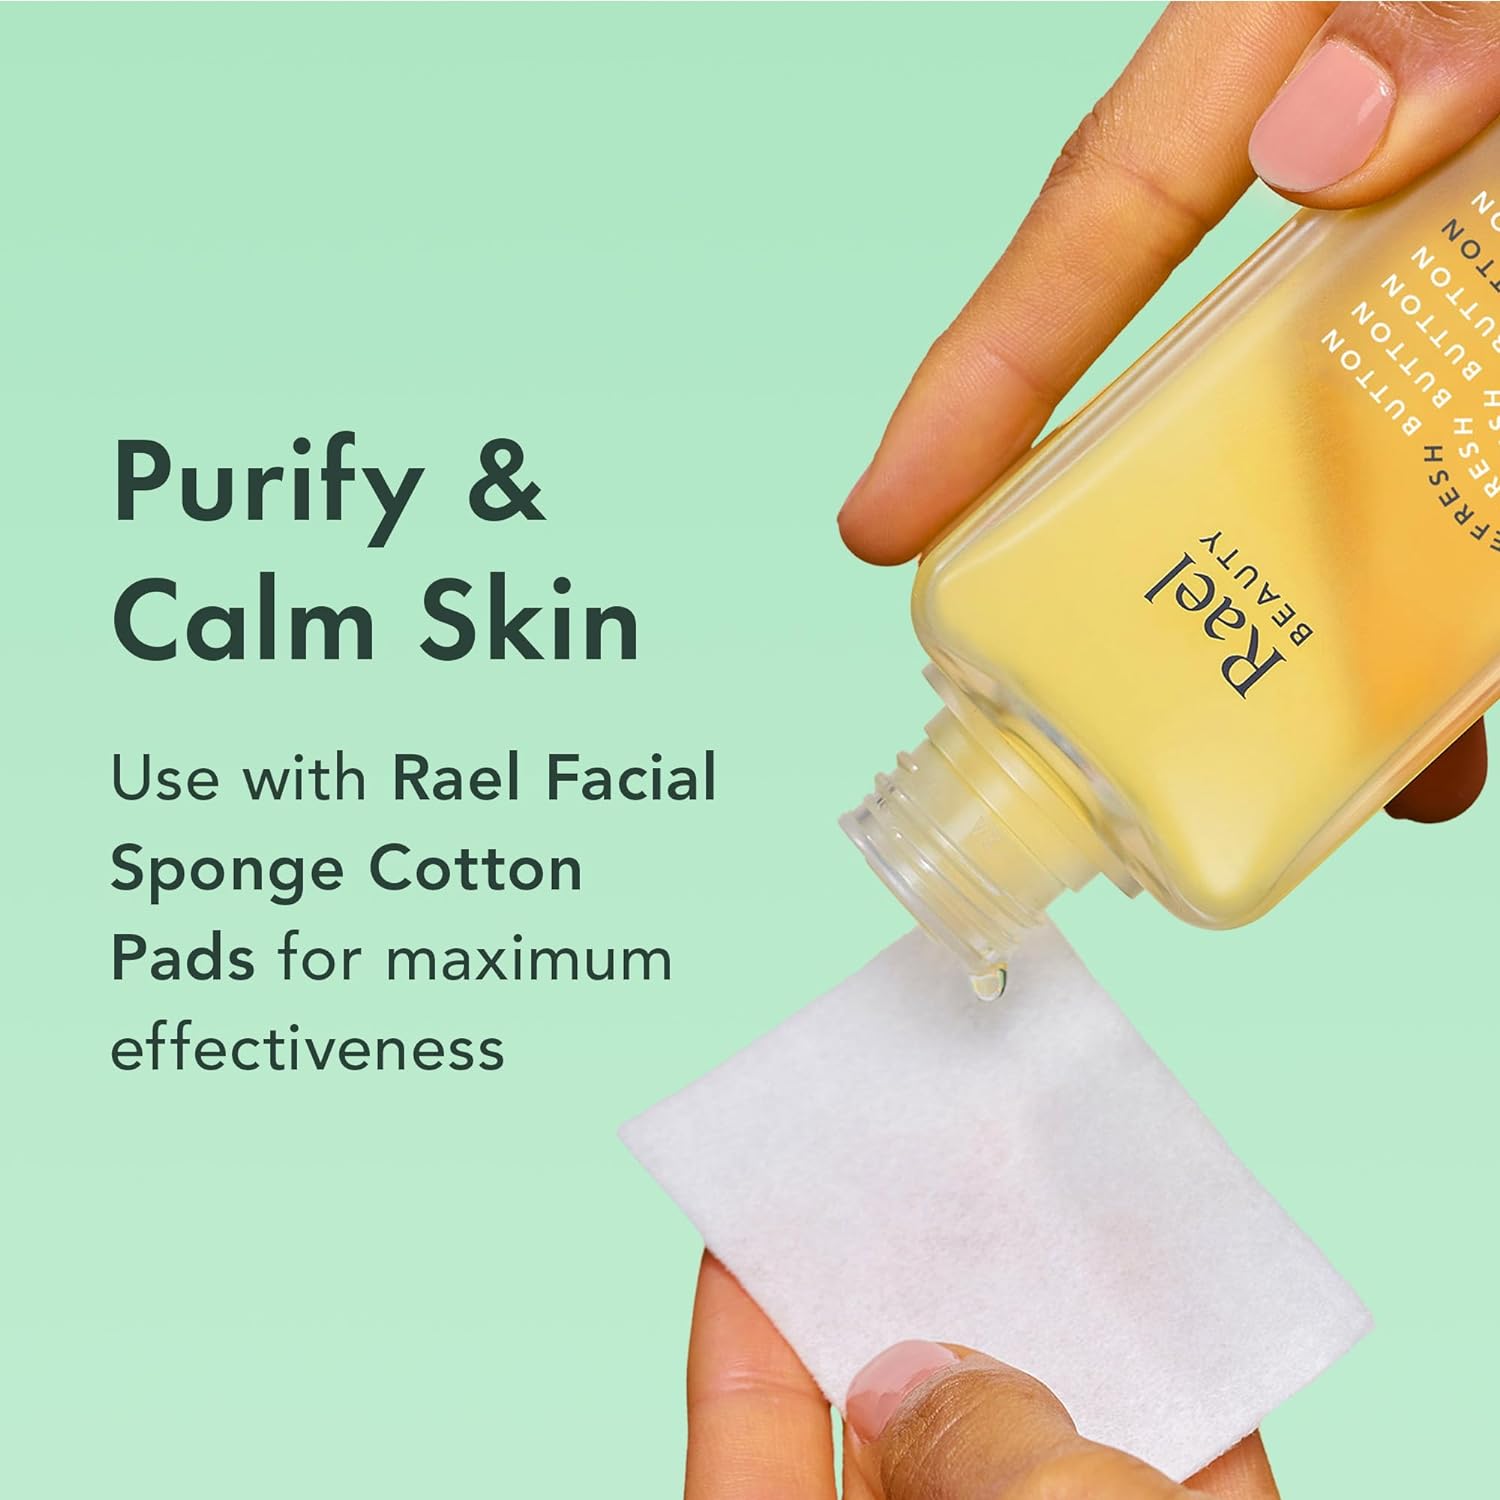 Rael Skin Care, Cleansing Water for Face - Calming Cica, Gentle Daily Makeup Remover & Clenaser, Korean Skin Care, All Skin Types, Made With Hydrating H3O Hyaluronic Acid and Cica Extract, Cruelty Free Skin Care (5.07oz) : Beauty & Personal Care